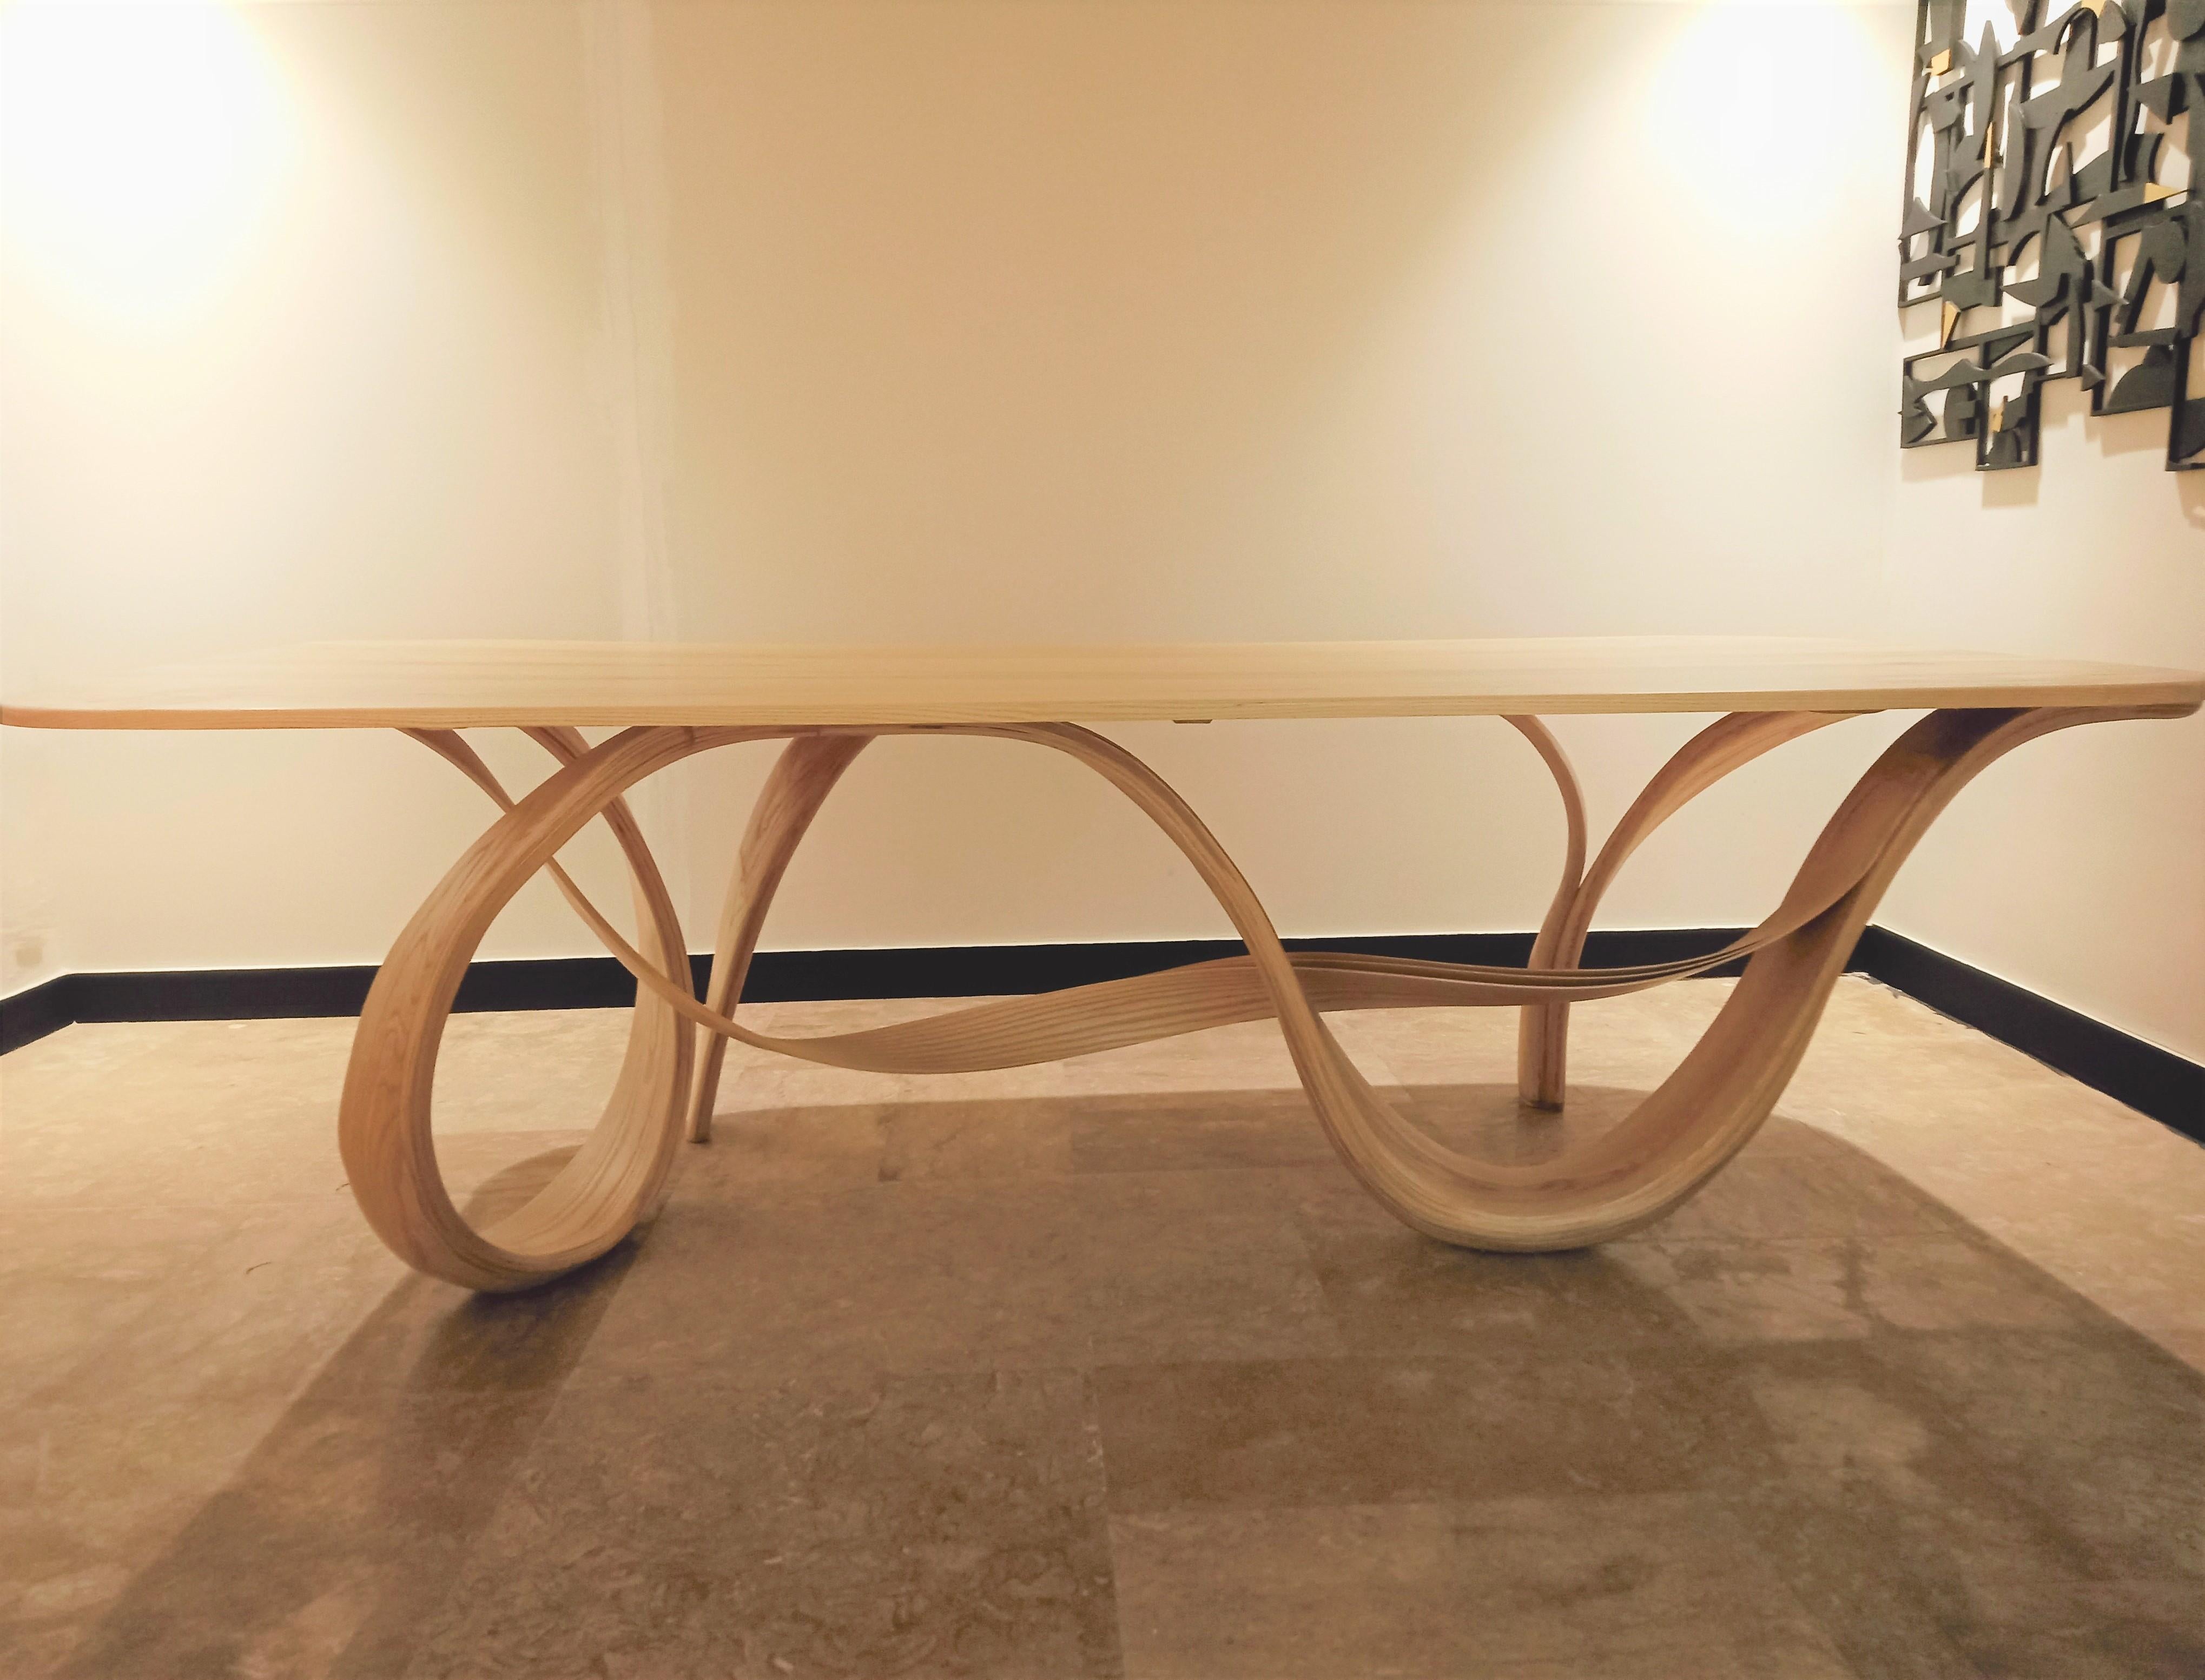 Selene, in Greek, means the moon, is a dining table crafted by bending solid Ash wood. The studio tried to mimic the design elements of nature. All the forms at the base are genteelly twisting and turning into each other while holding up the